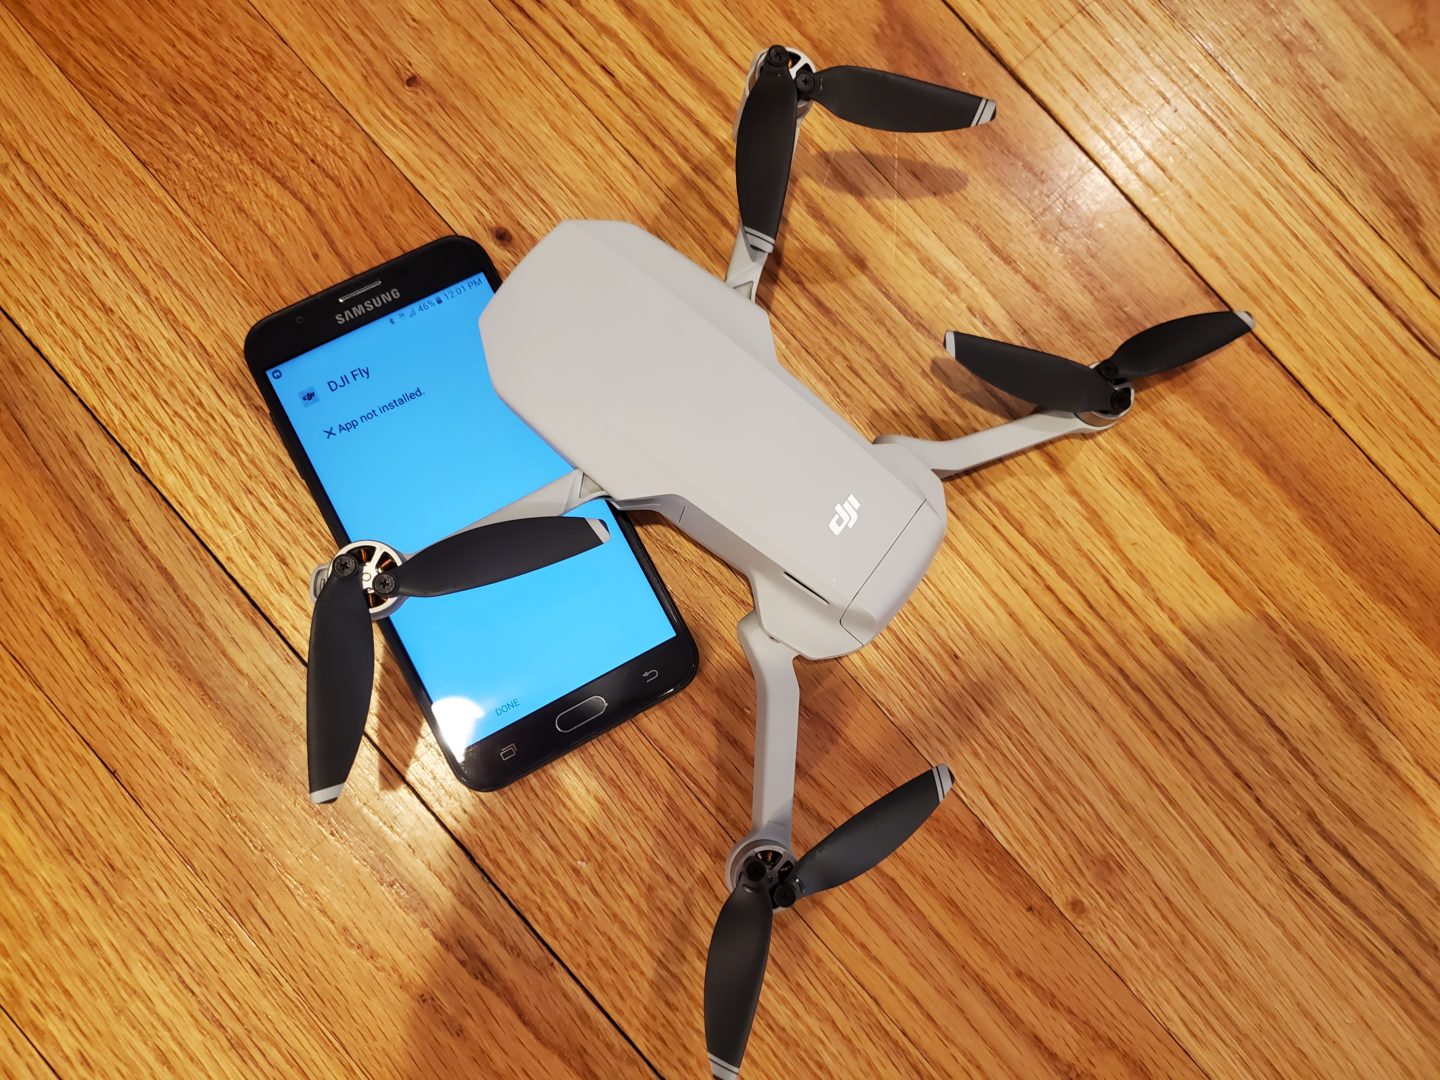 photo of the dji mavic mini with a phone showing DJI Fly app not installed